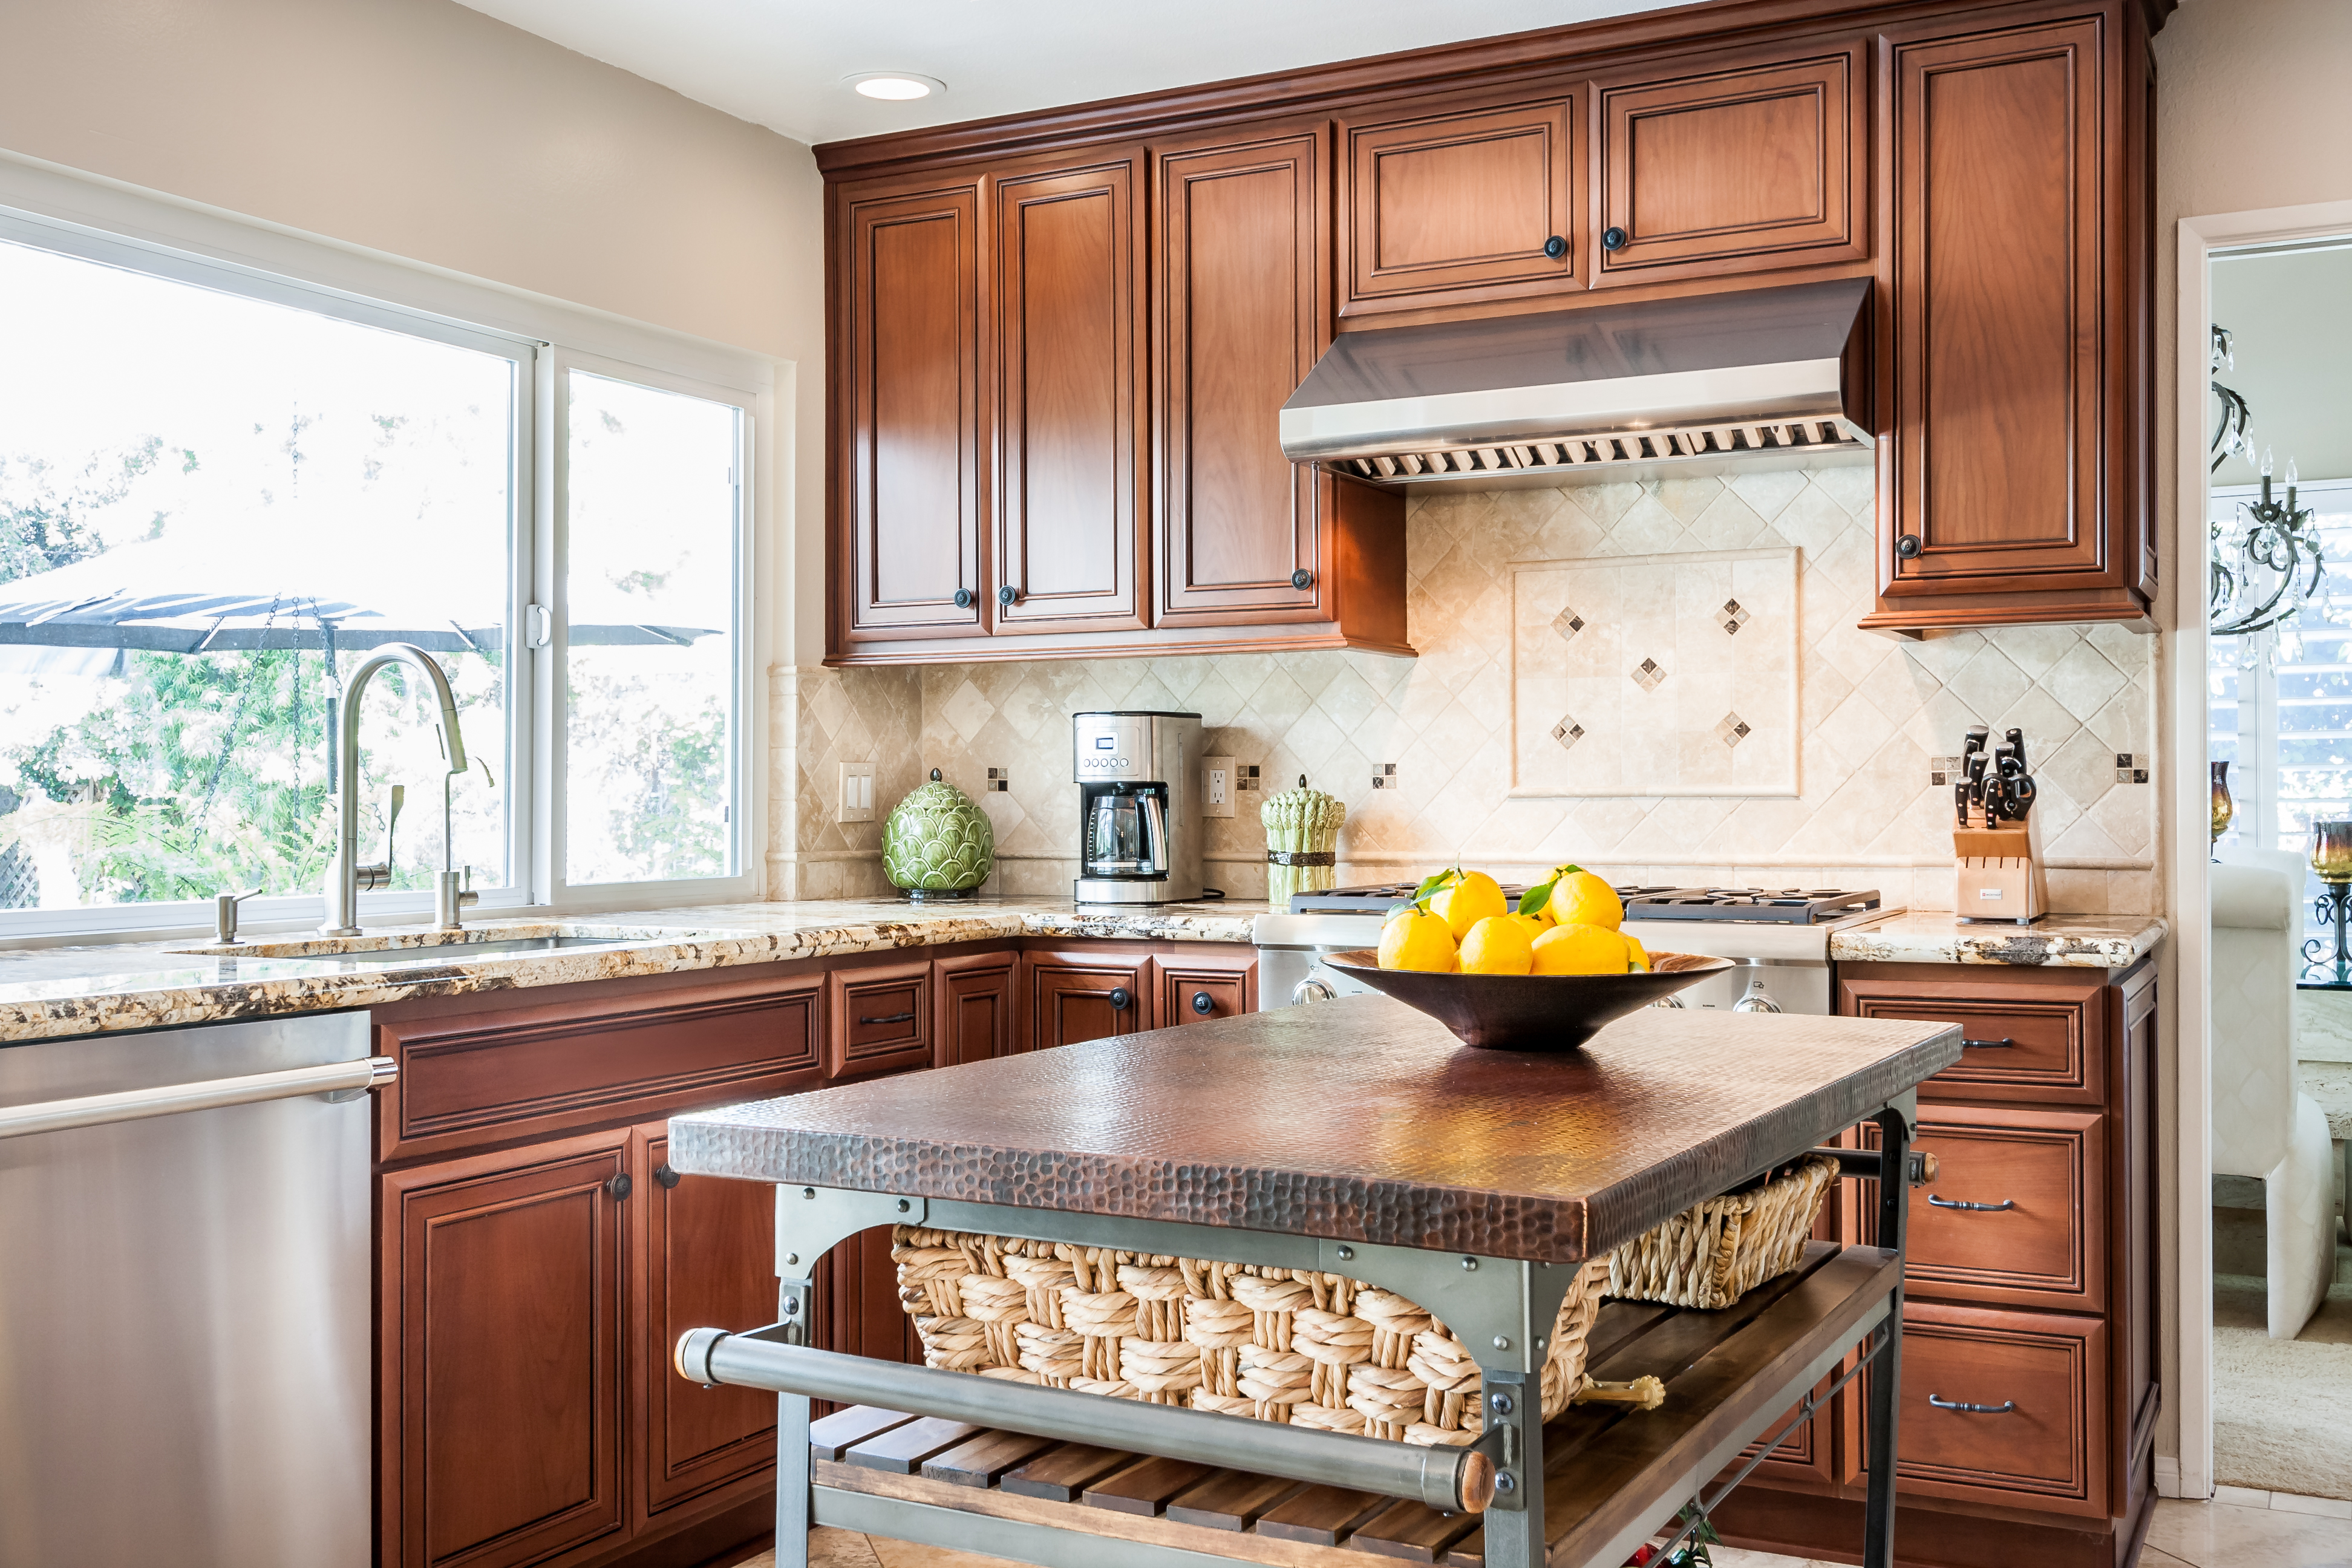 Porous and Non-Porous Countertops: What’s the Difference?